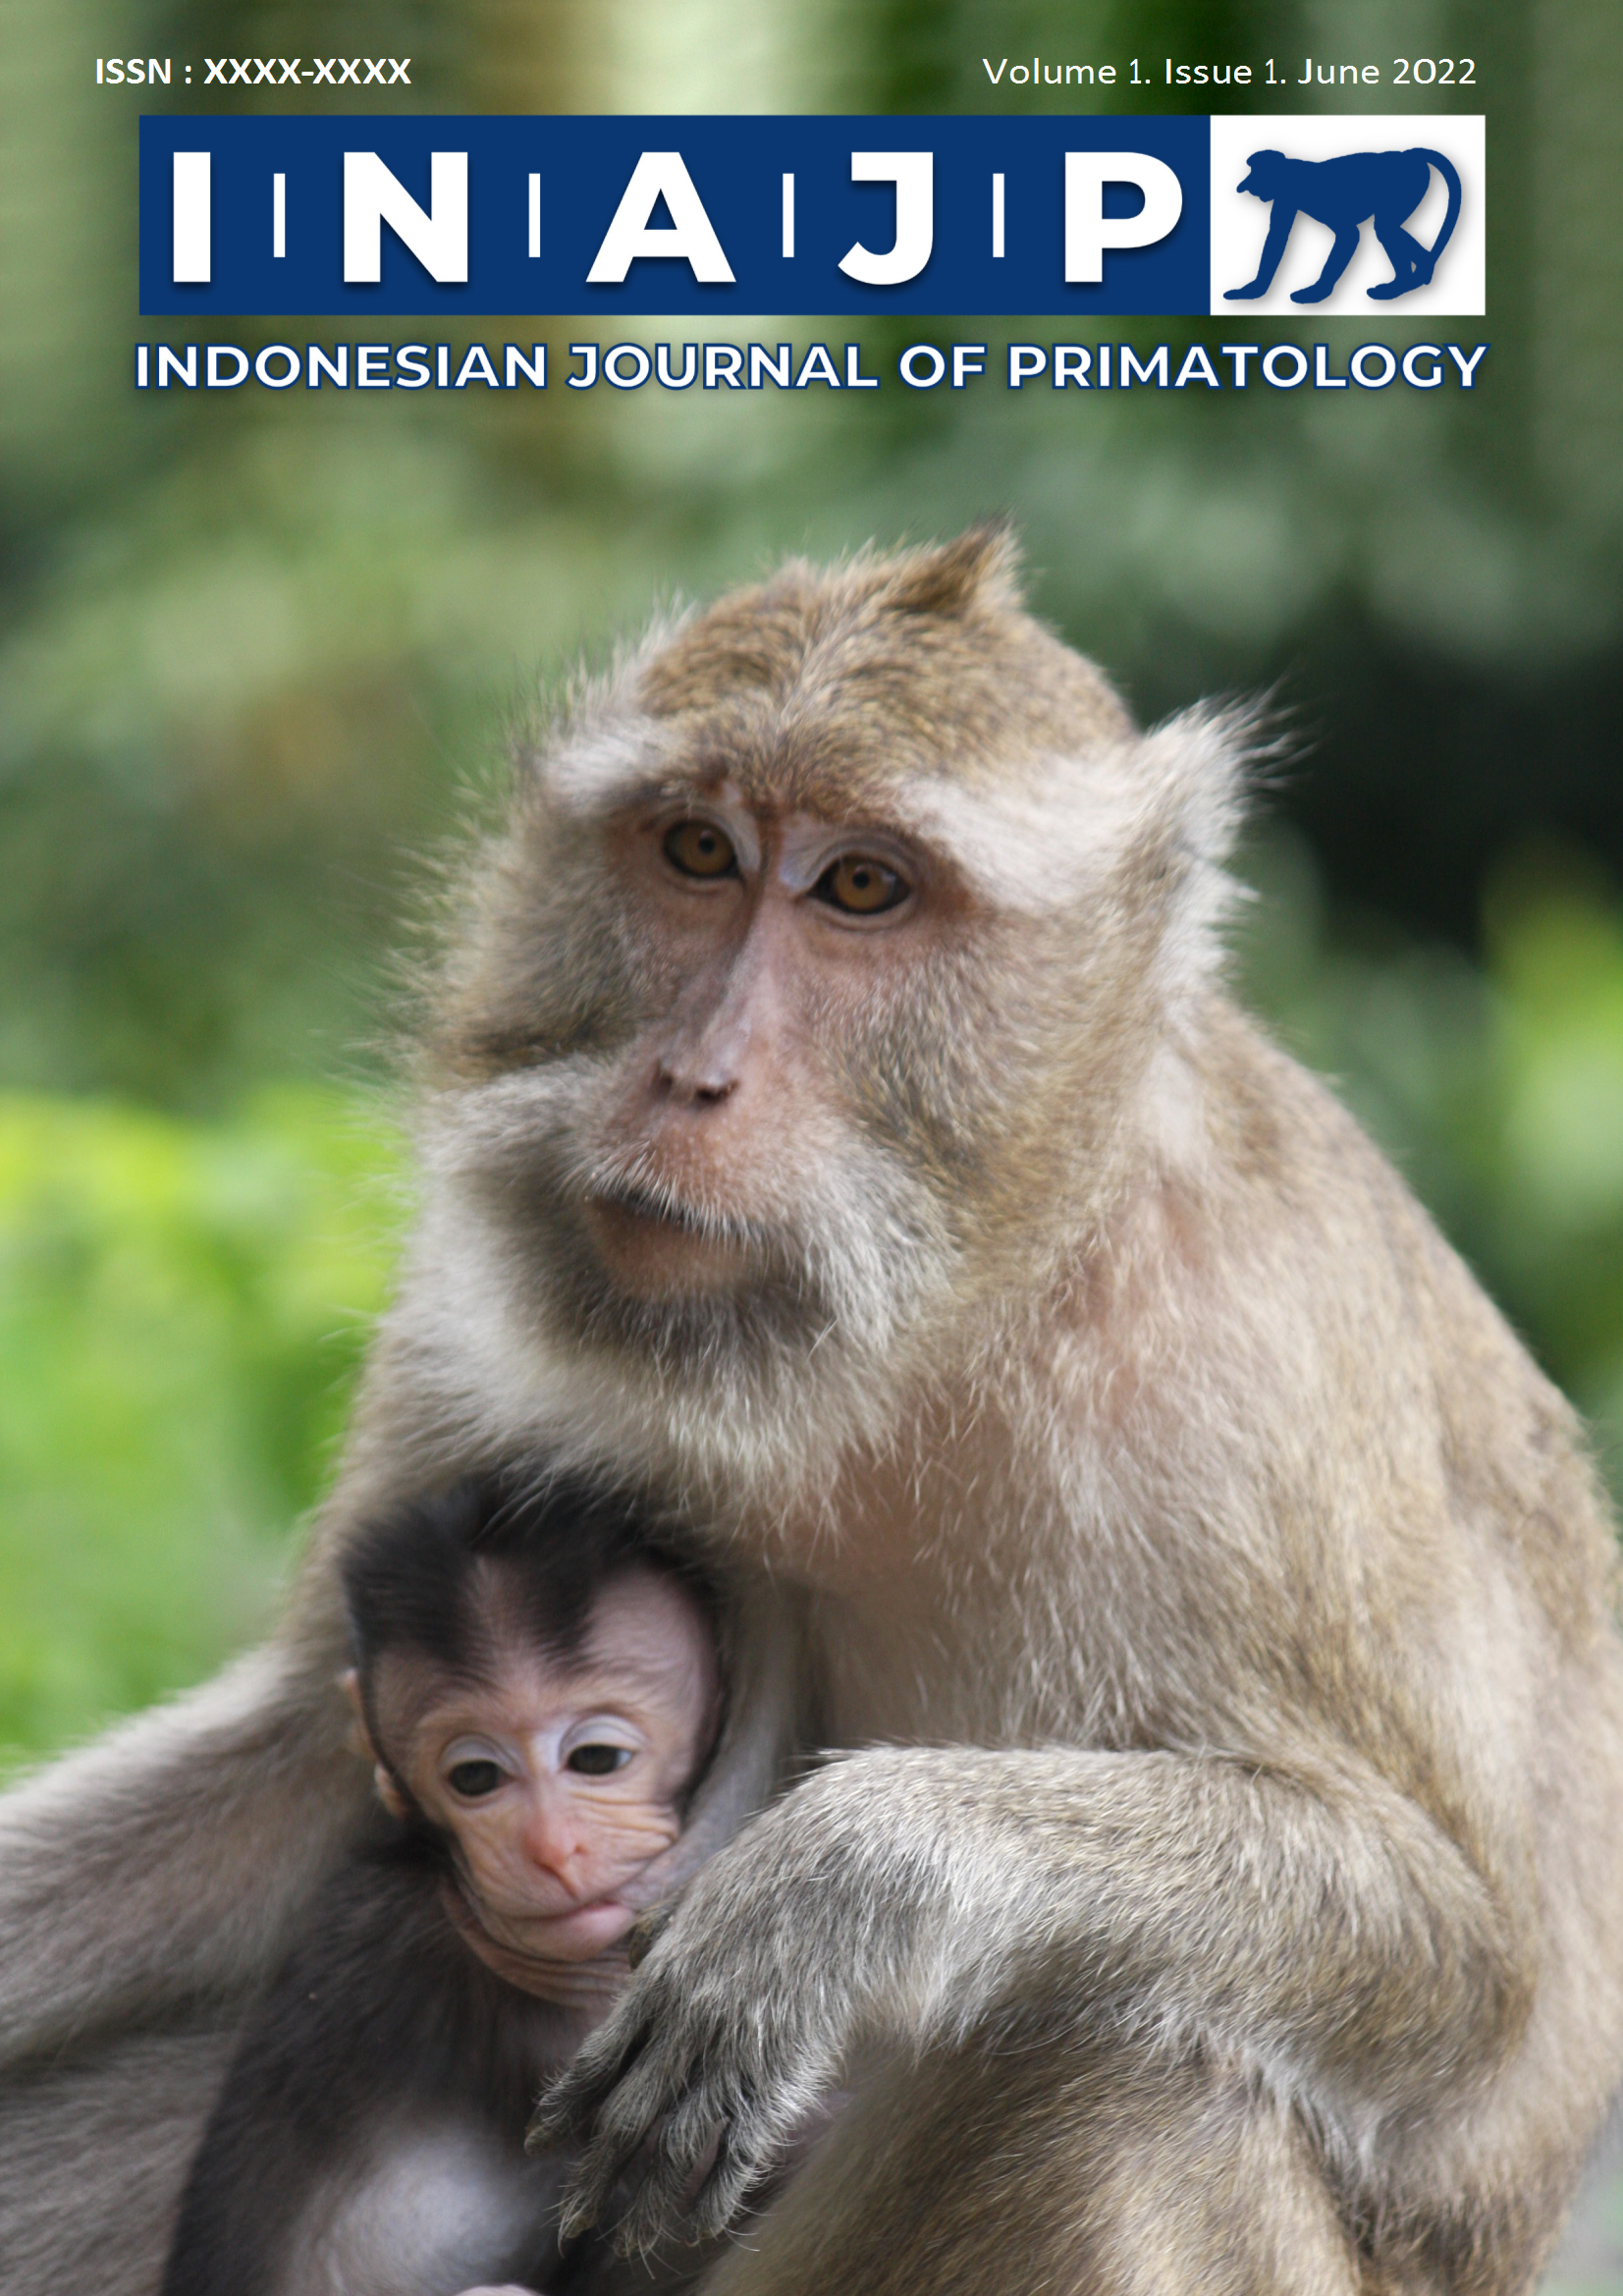 Macaca fascicularis, Mother and Infant in Tinjil Island, Banten, Indonesia. Photo courtesy to: Dr Entang Iskandar